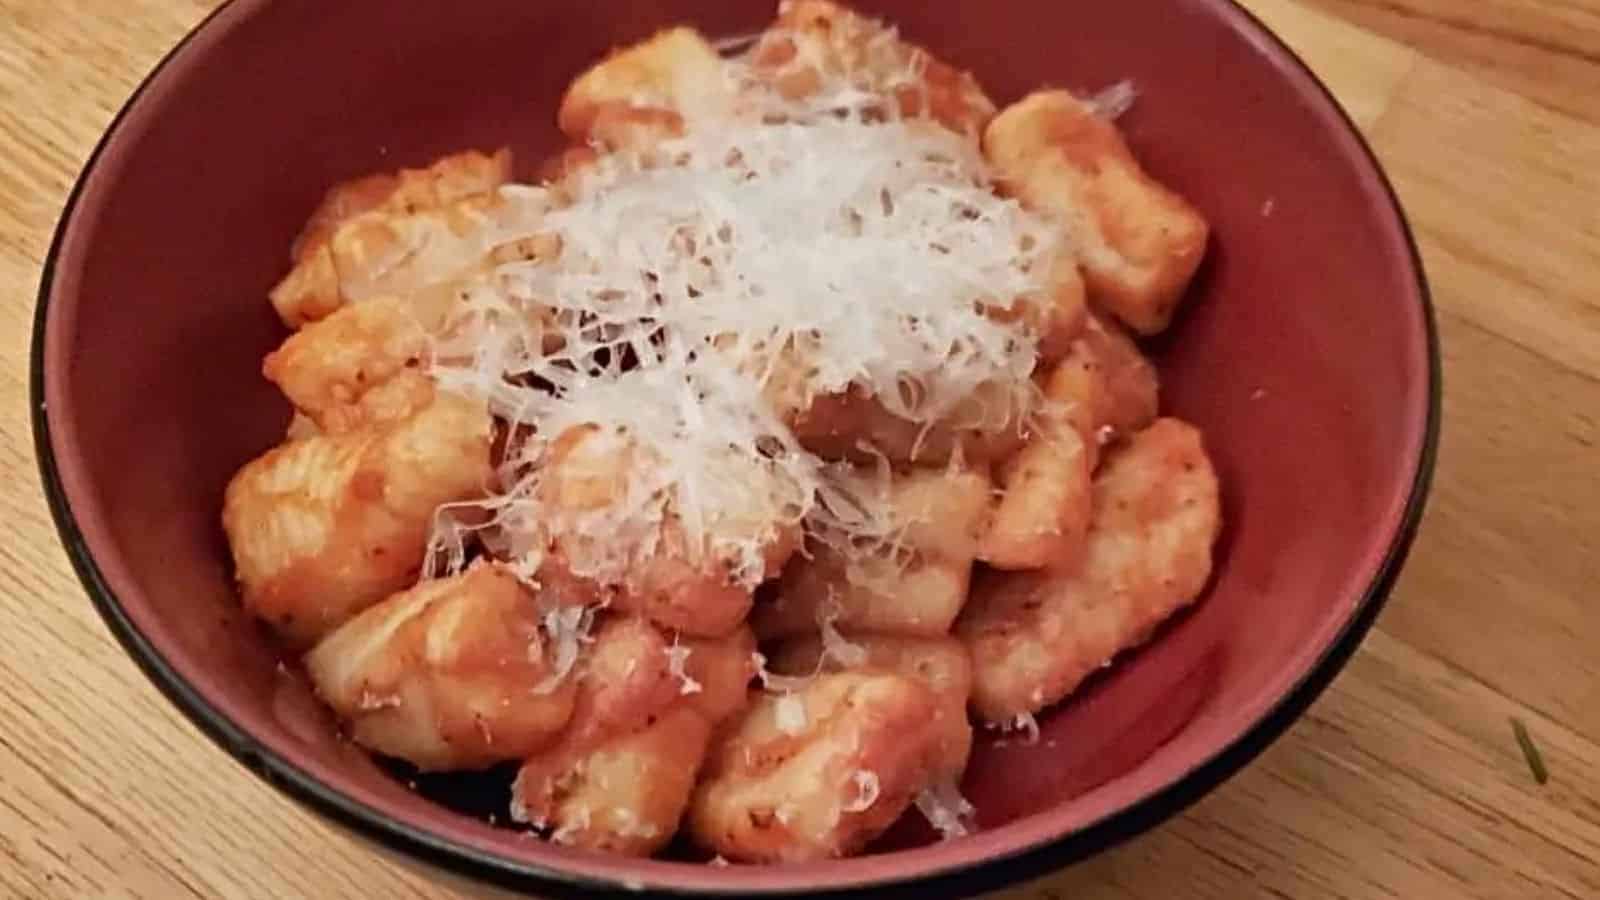 Image shows a bowl of Potato Gnocchi with grated cheese atop it.